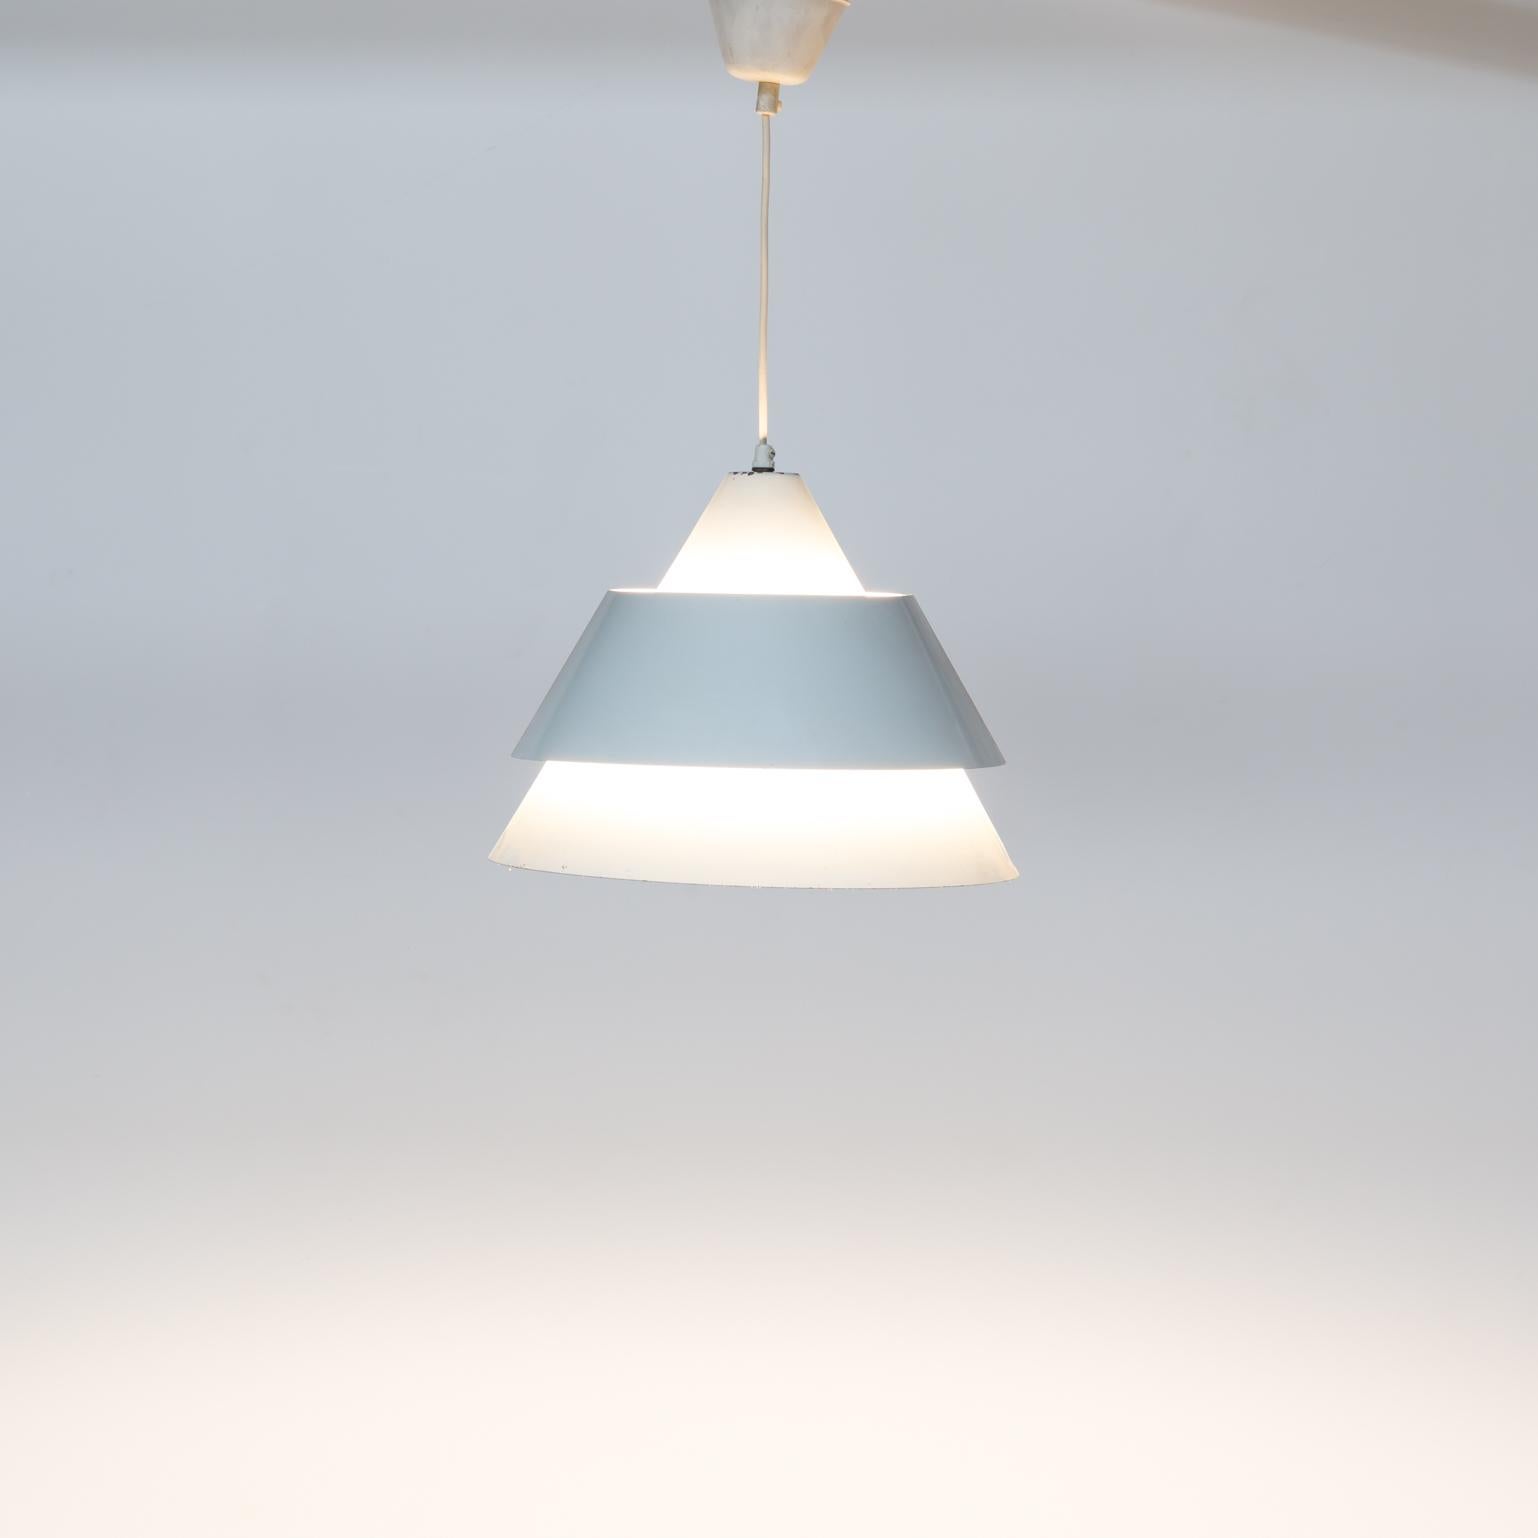 1970s white metal hanging lamp, pendant. Beautiful light projection through the metal. Good and working condition consistent with age and use.